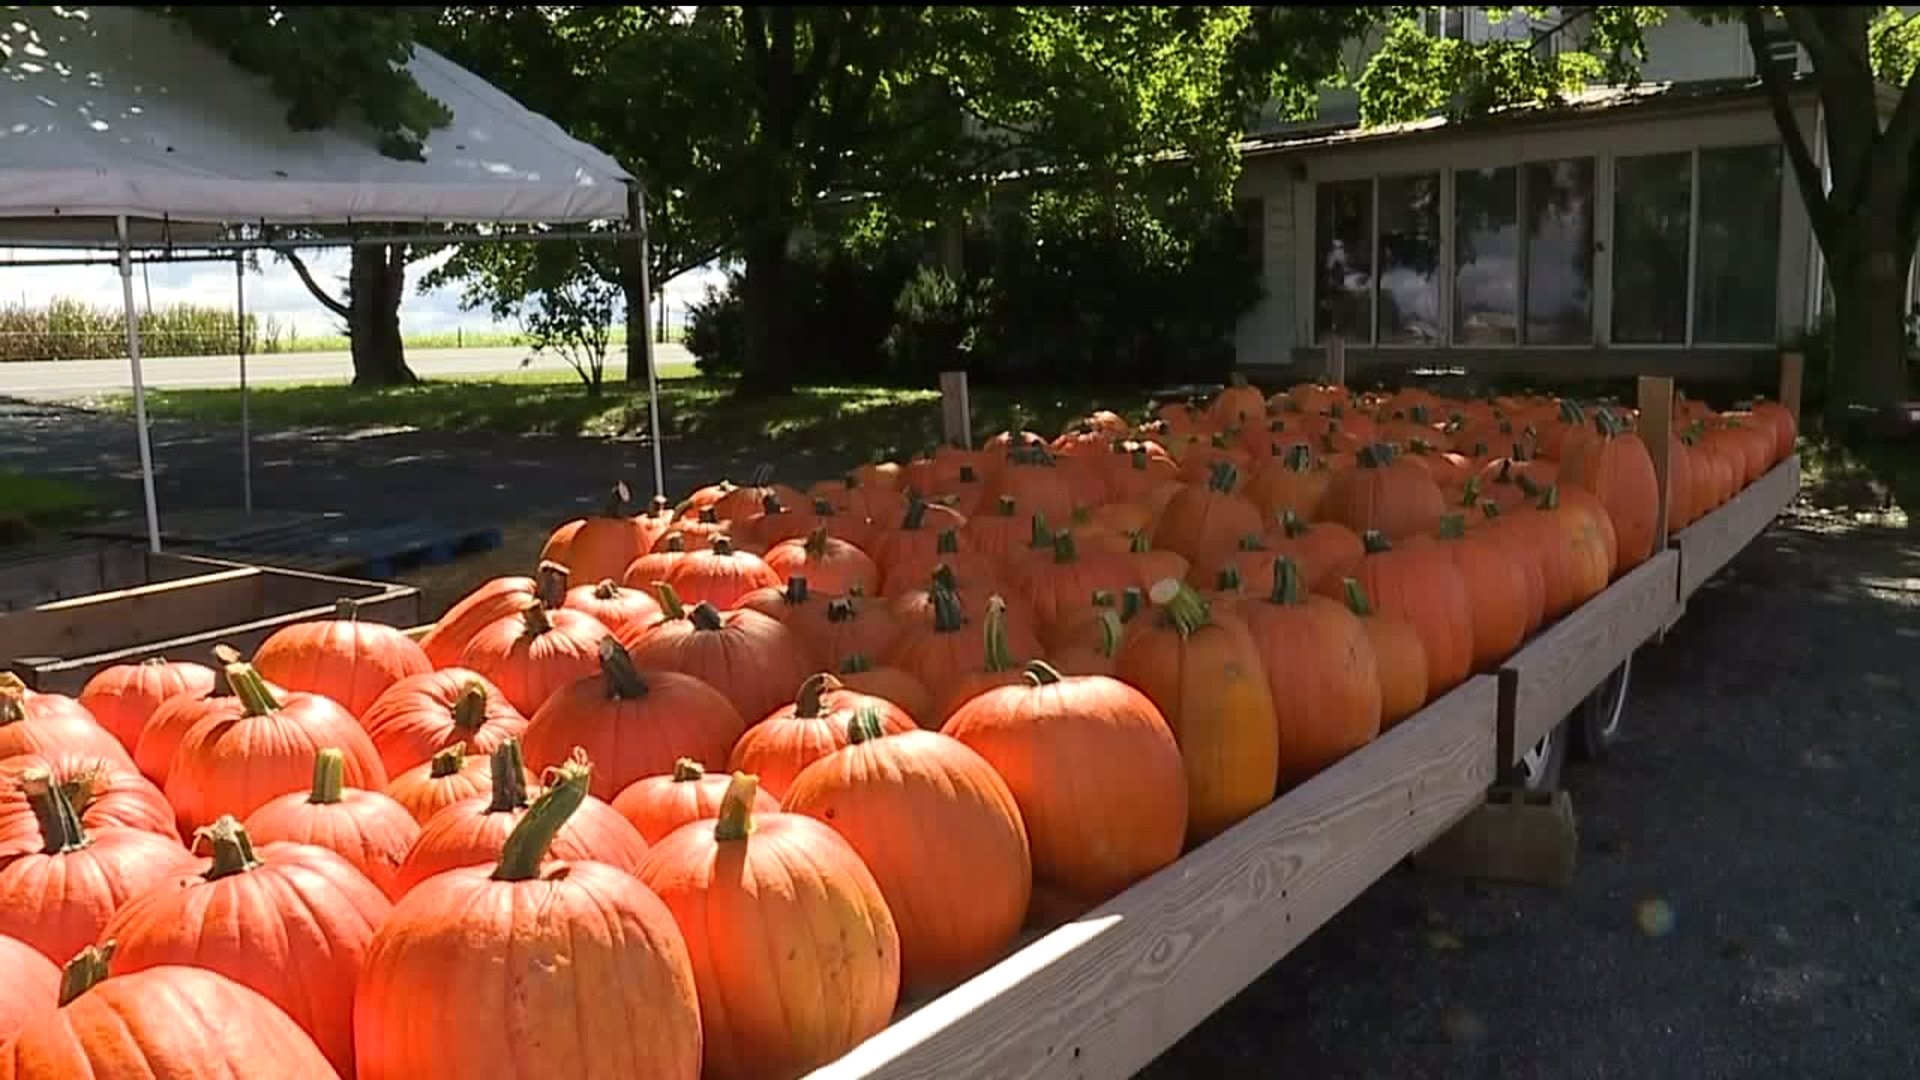 A Rainy Year for Pumpkins